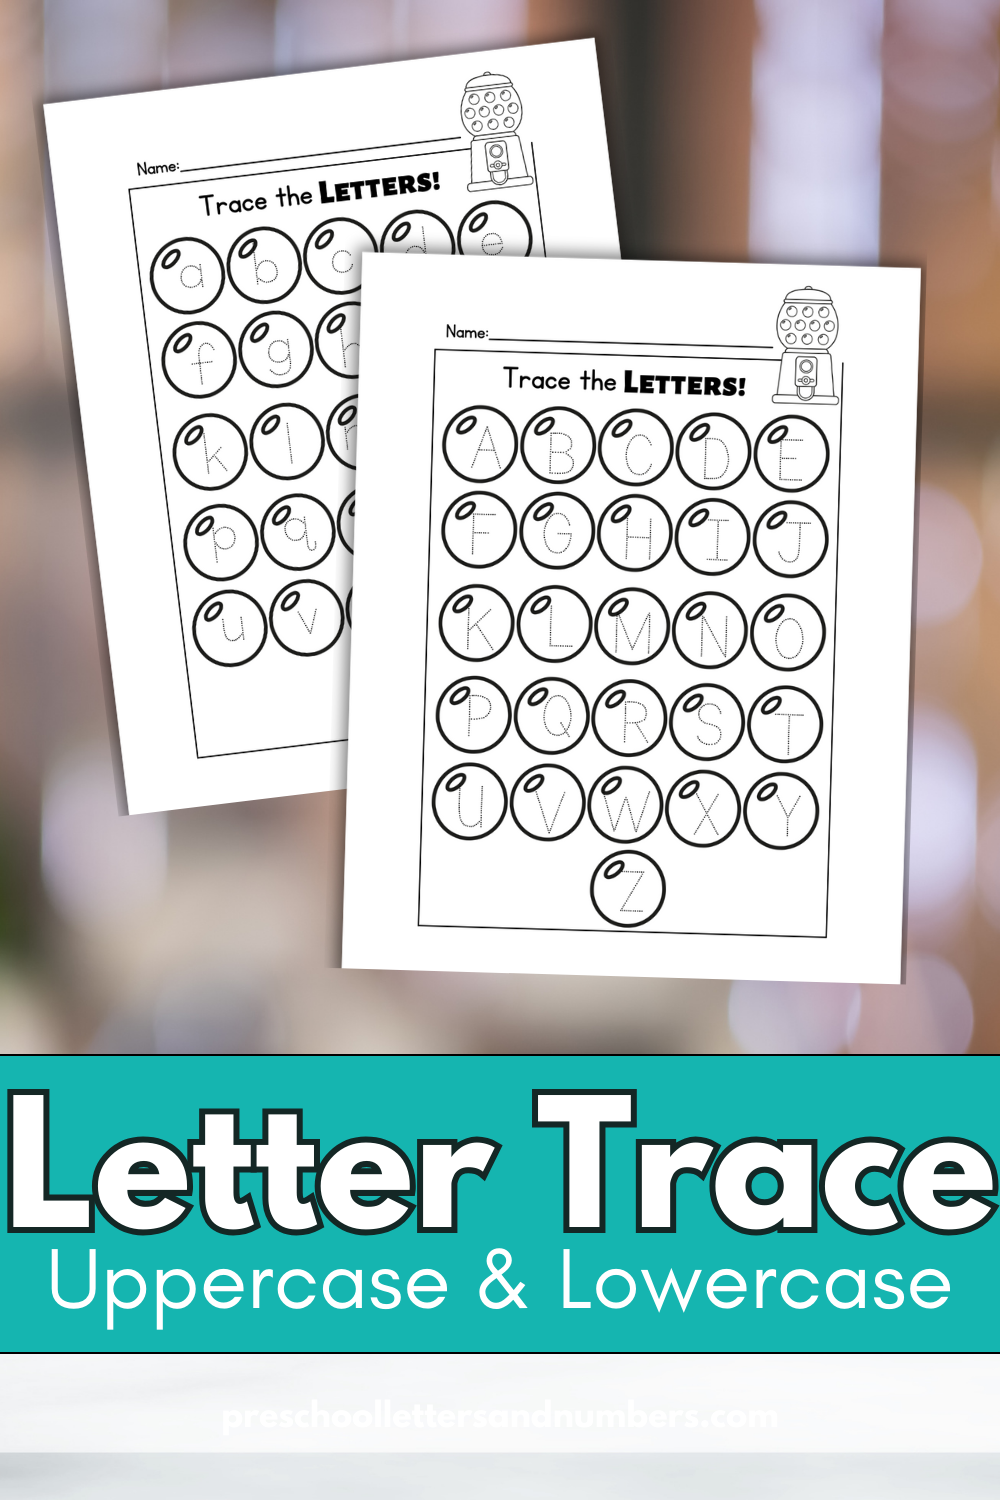 tracing-letters-worksheets Free Letter Tracing Worksheets